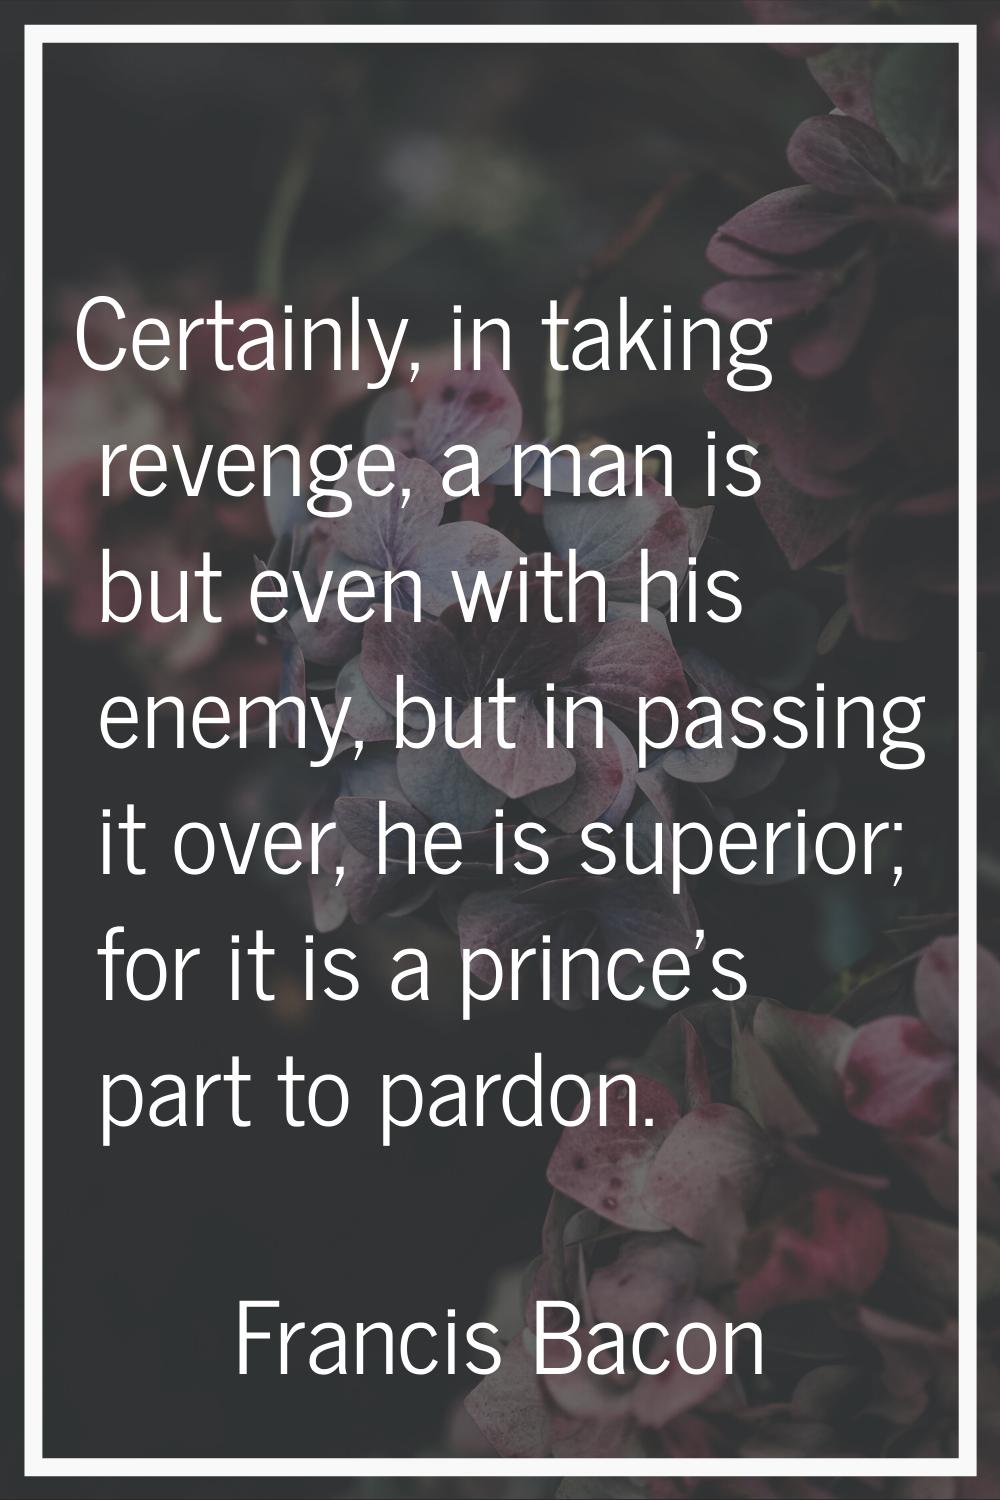 Certainly, in taking revenge, a man is but even with his enemy, but in passing it over, he is super